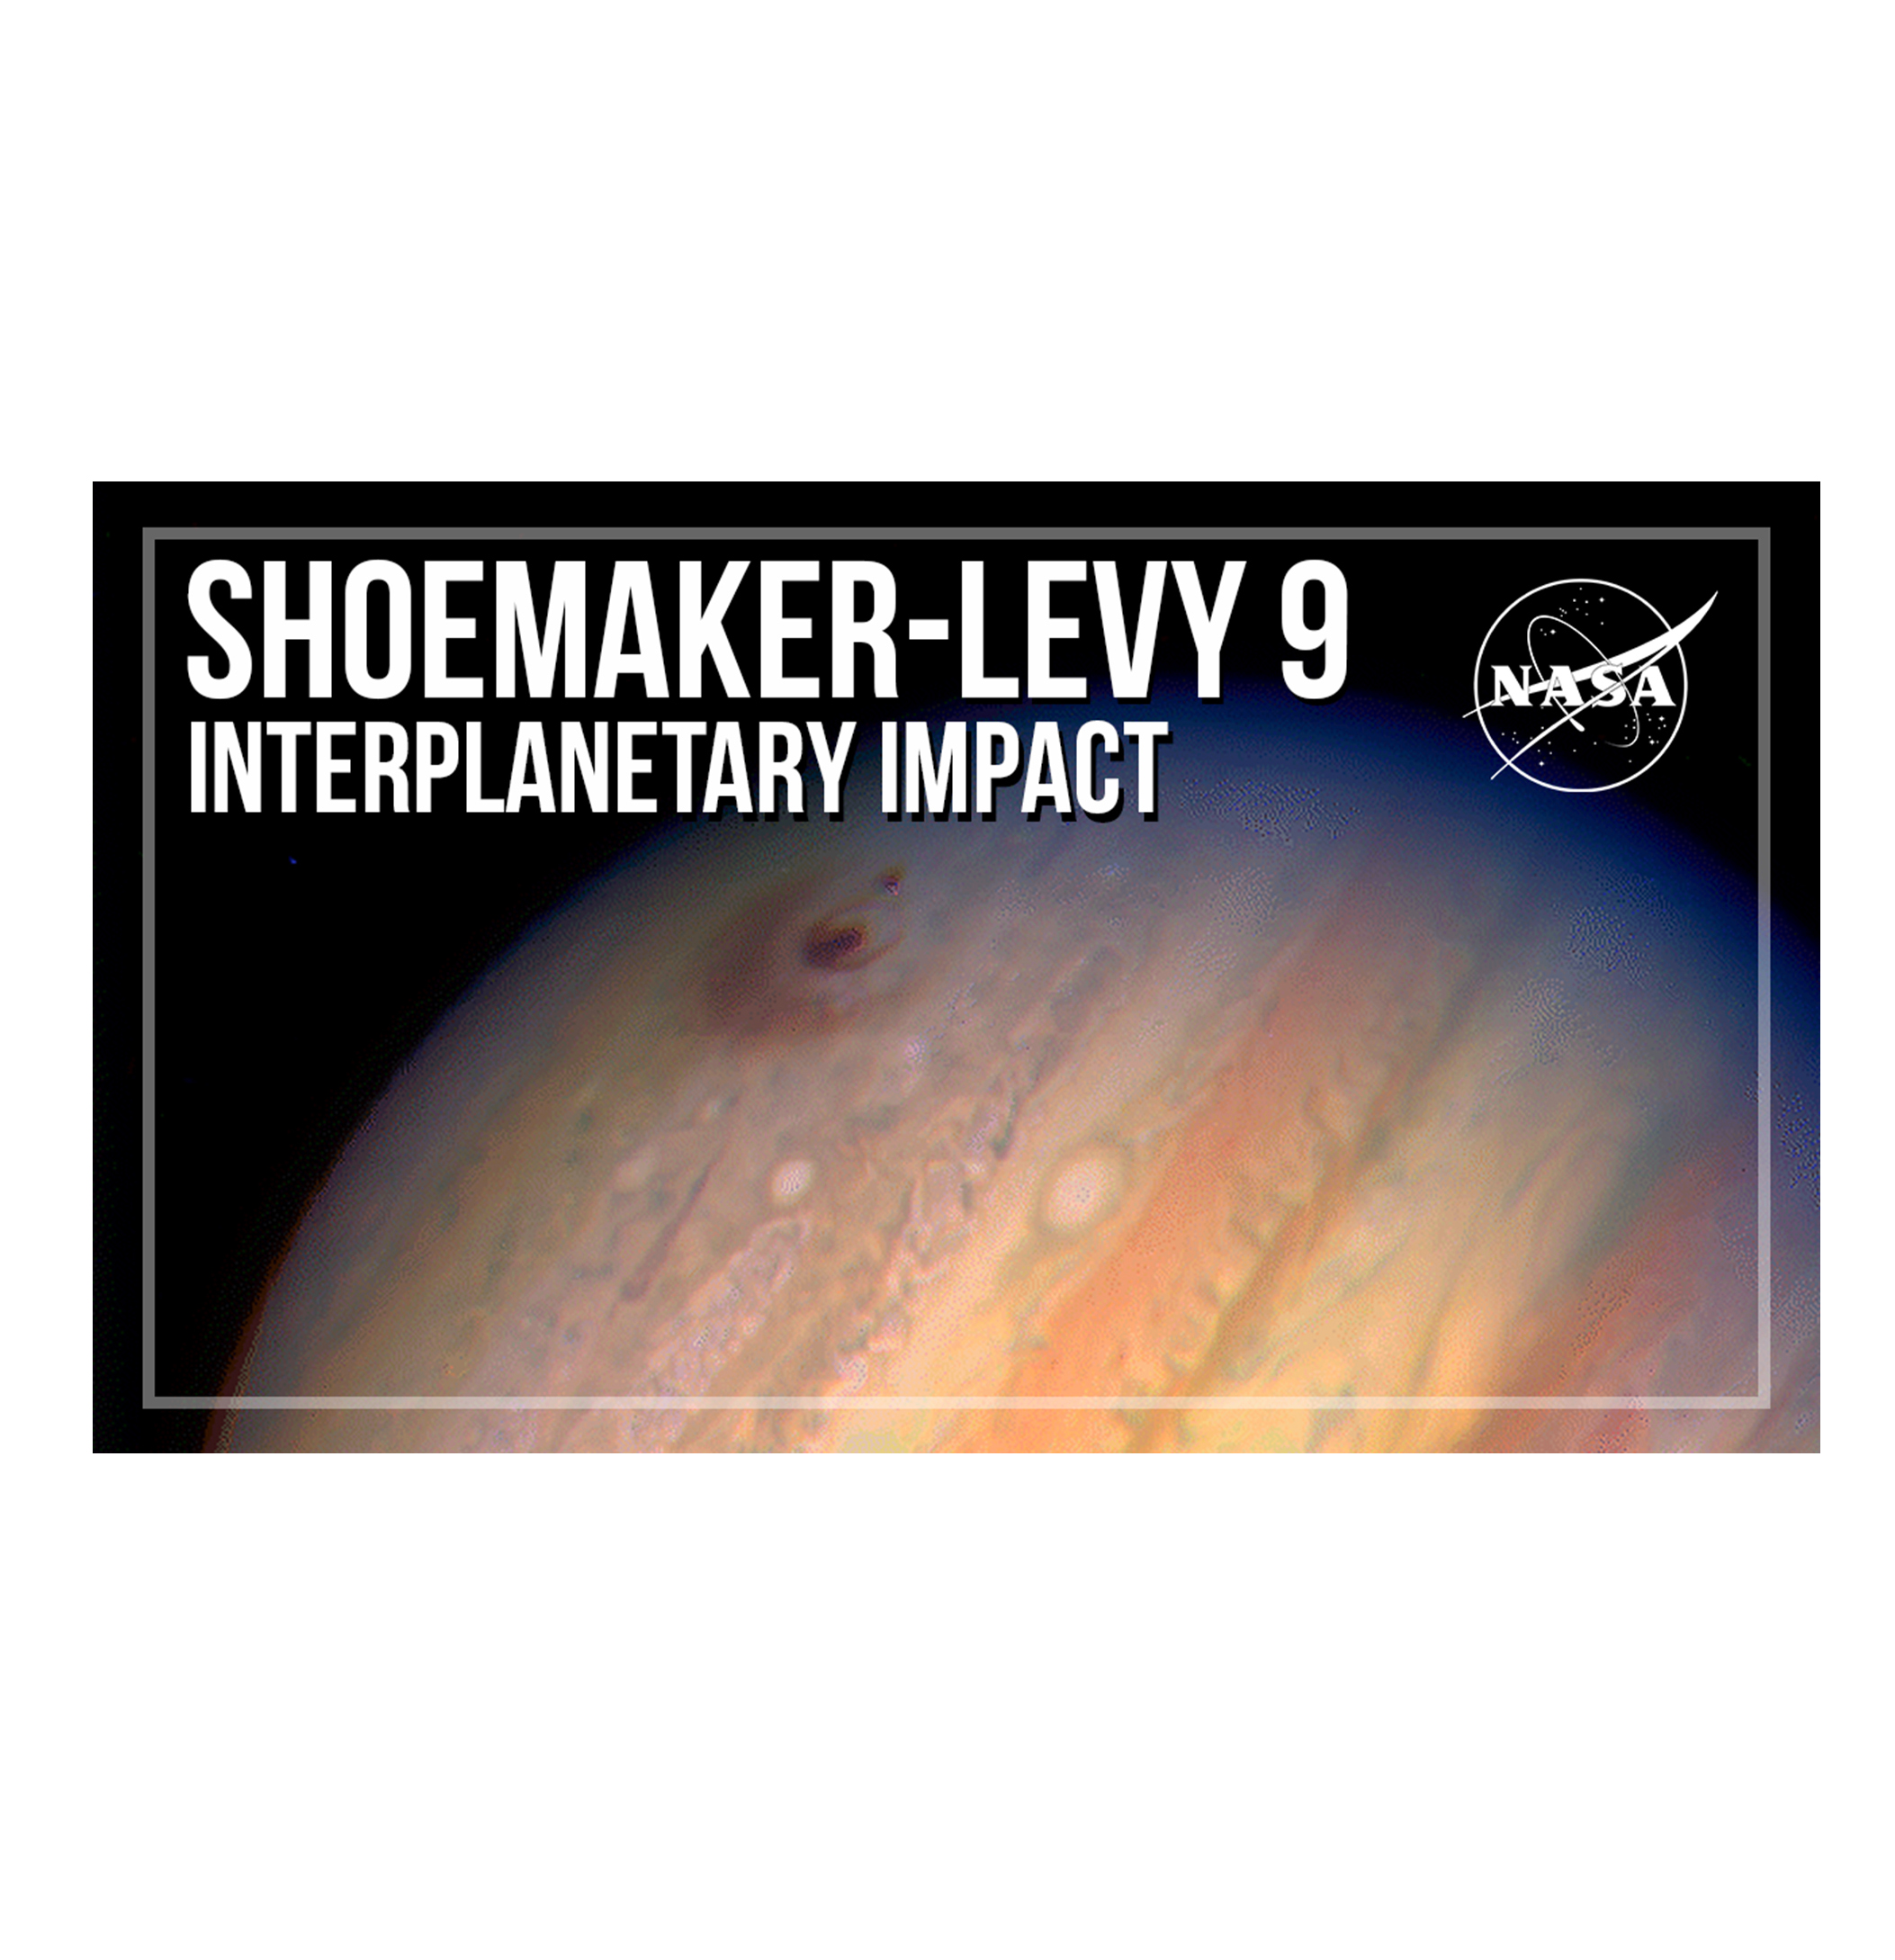 Titles in white: Shoemaker-Levy 9: Interplanetary Impact" and the NASA Meatball logo at the top of the image. The image is of Jupiter and one of comet Shoemaker-Levy 9's impact sites on the planet. We see half of Jupiter its cloud bands extending from the lower left to the upper right. The impact site looks like a dark-maroon bull's eye.